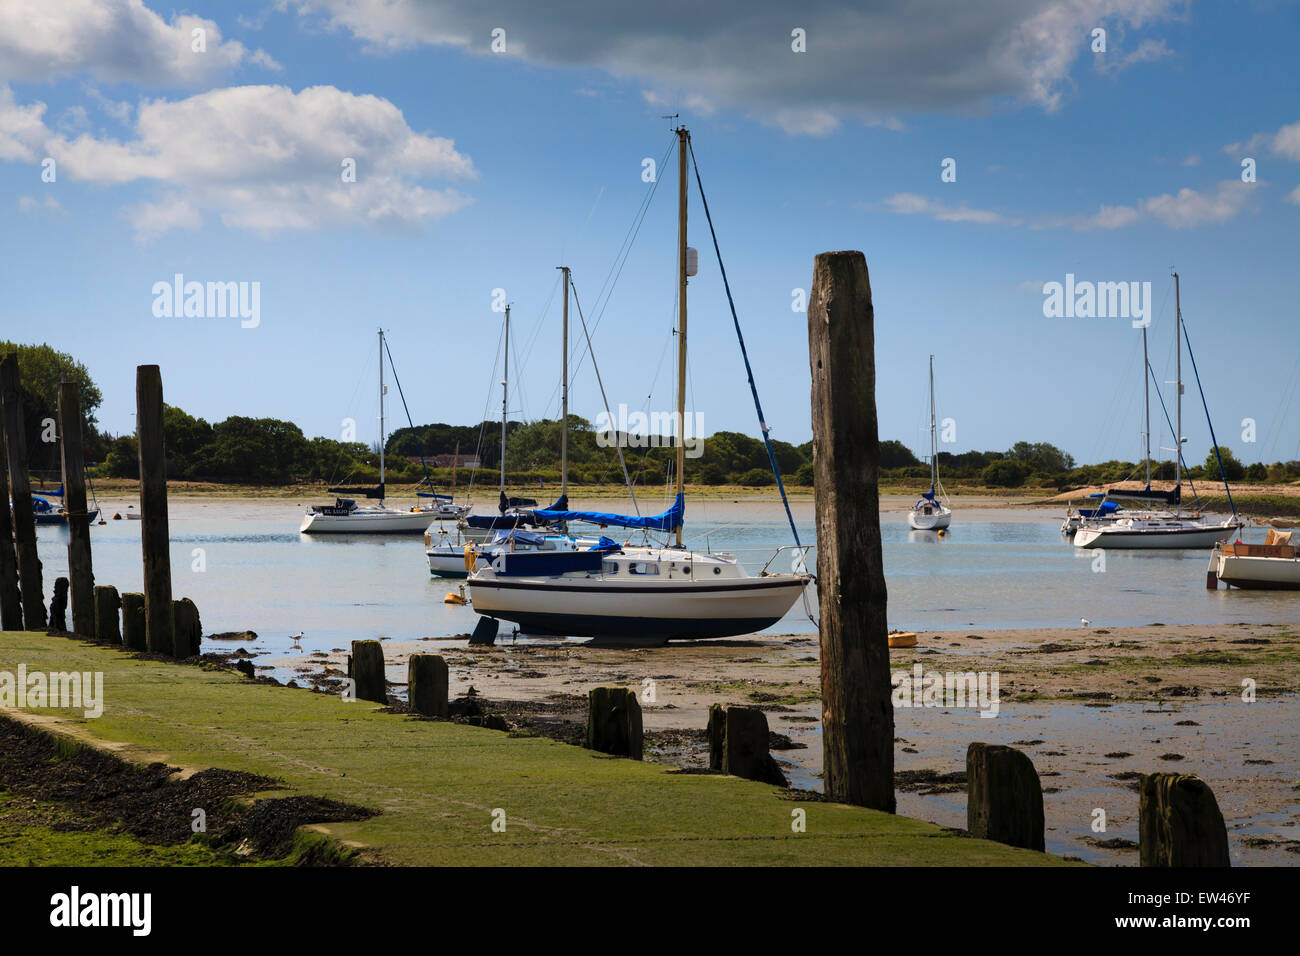 Slime covered slipway with yachts at low tide Stock Photo